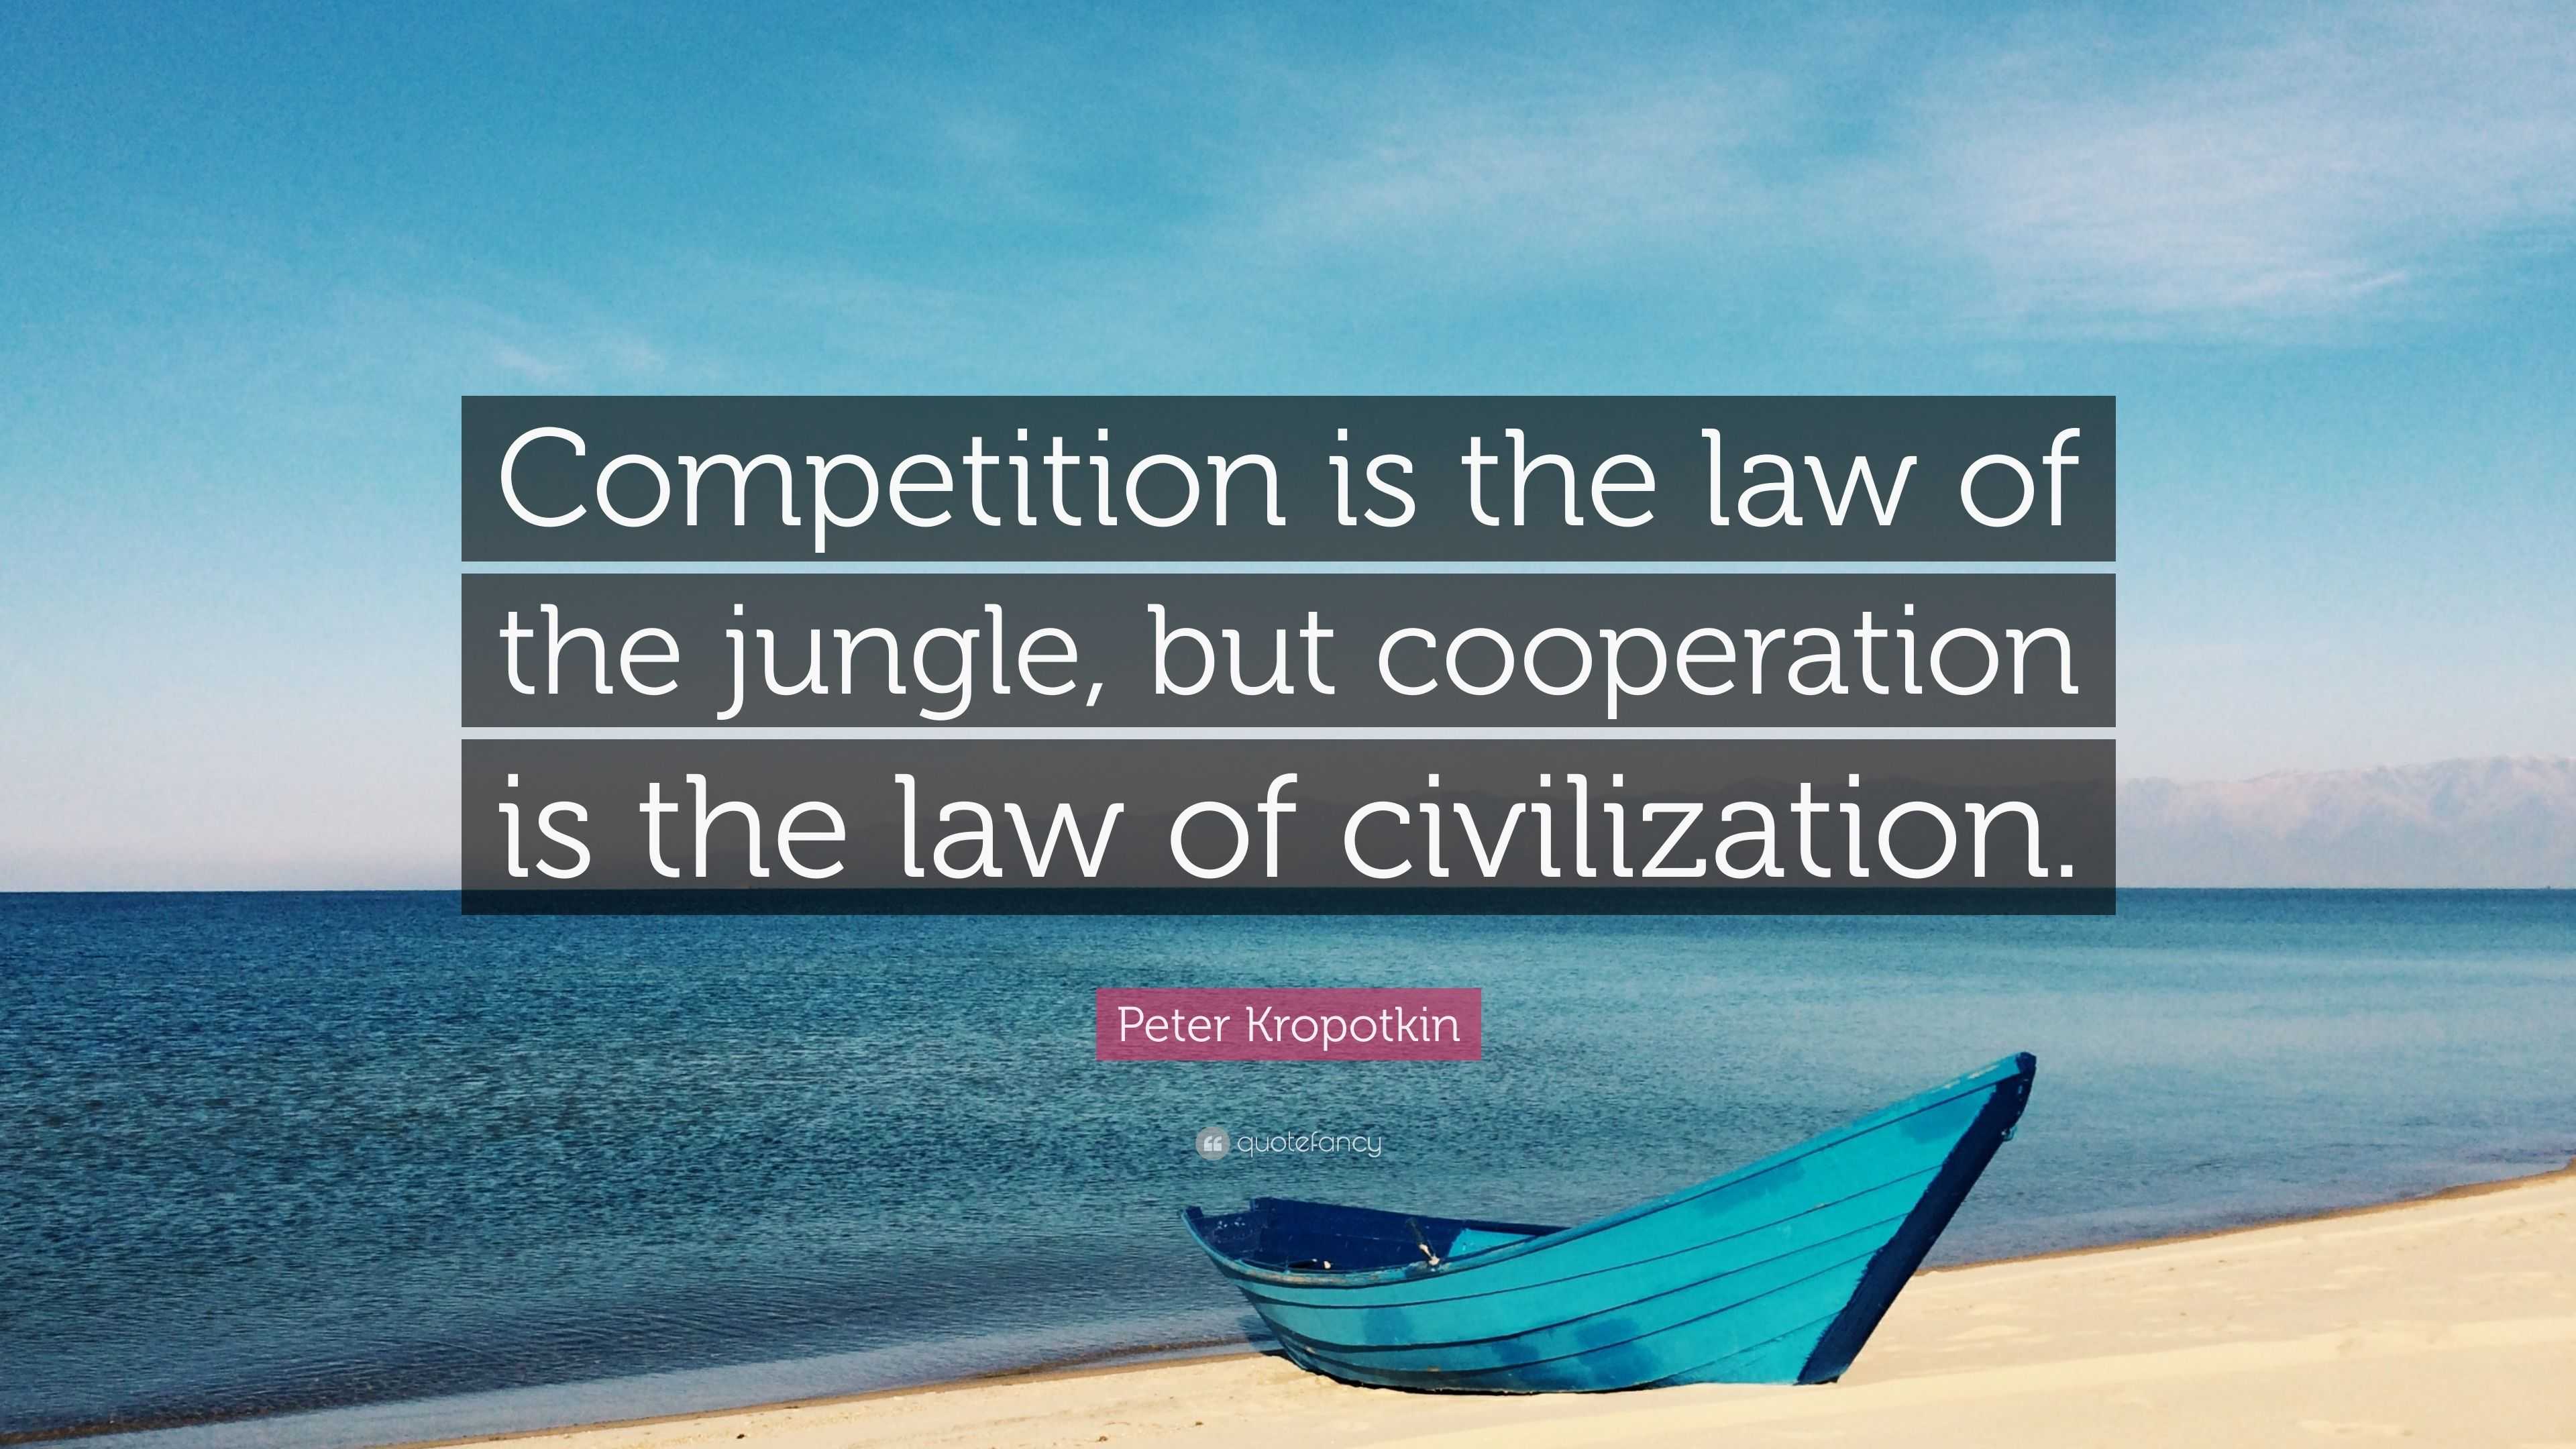 Peter Kropotkin Quote: "Competition is the law of the jungle, but cooperation is the law of ...